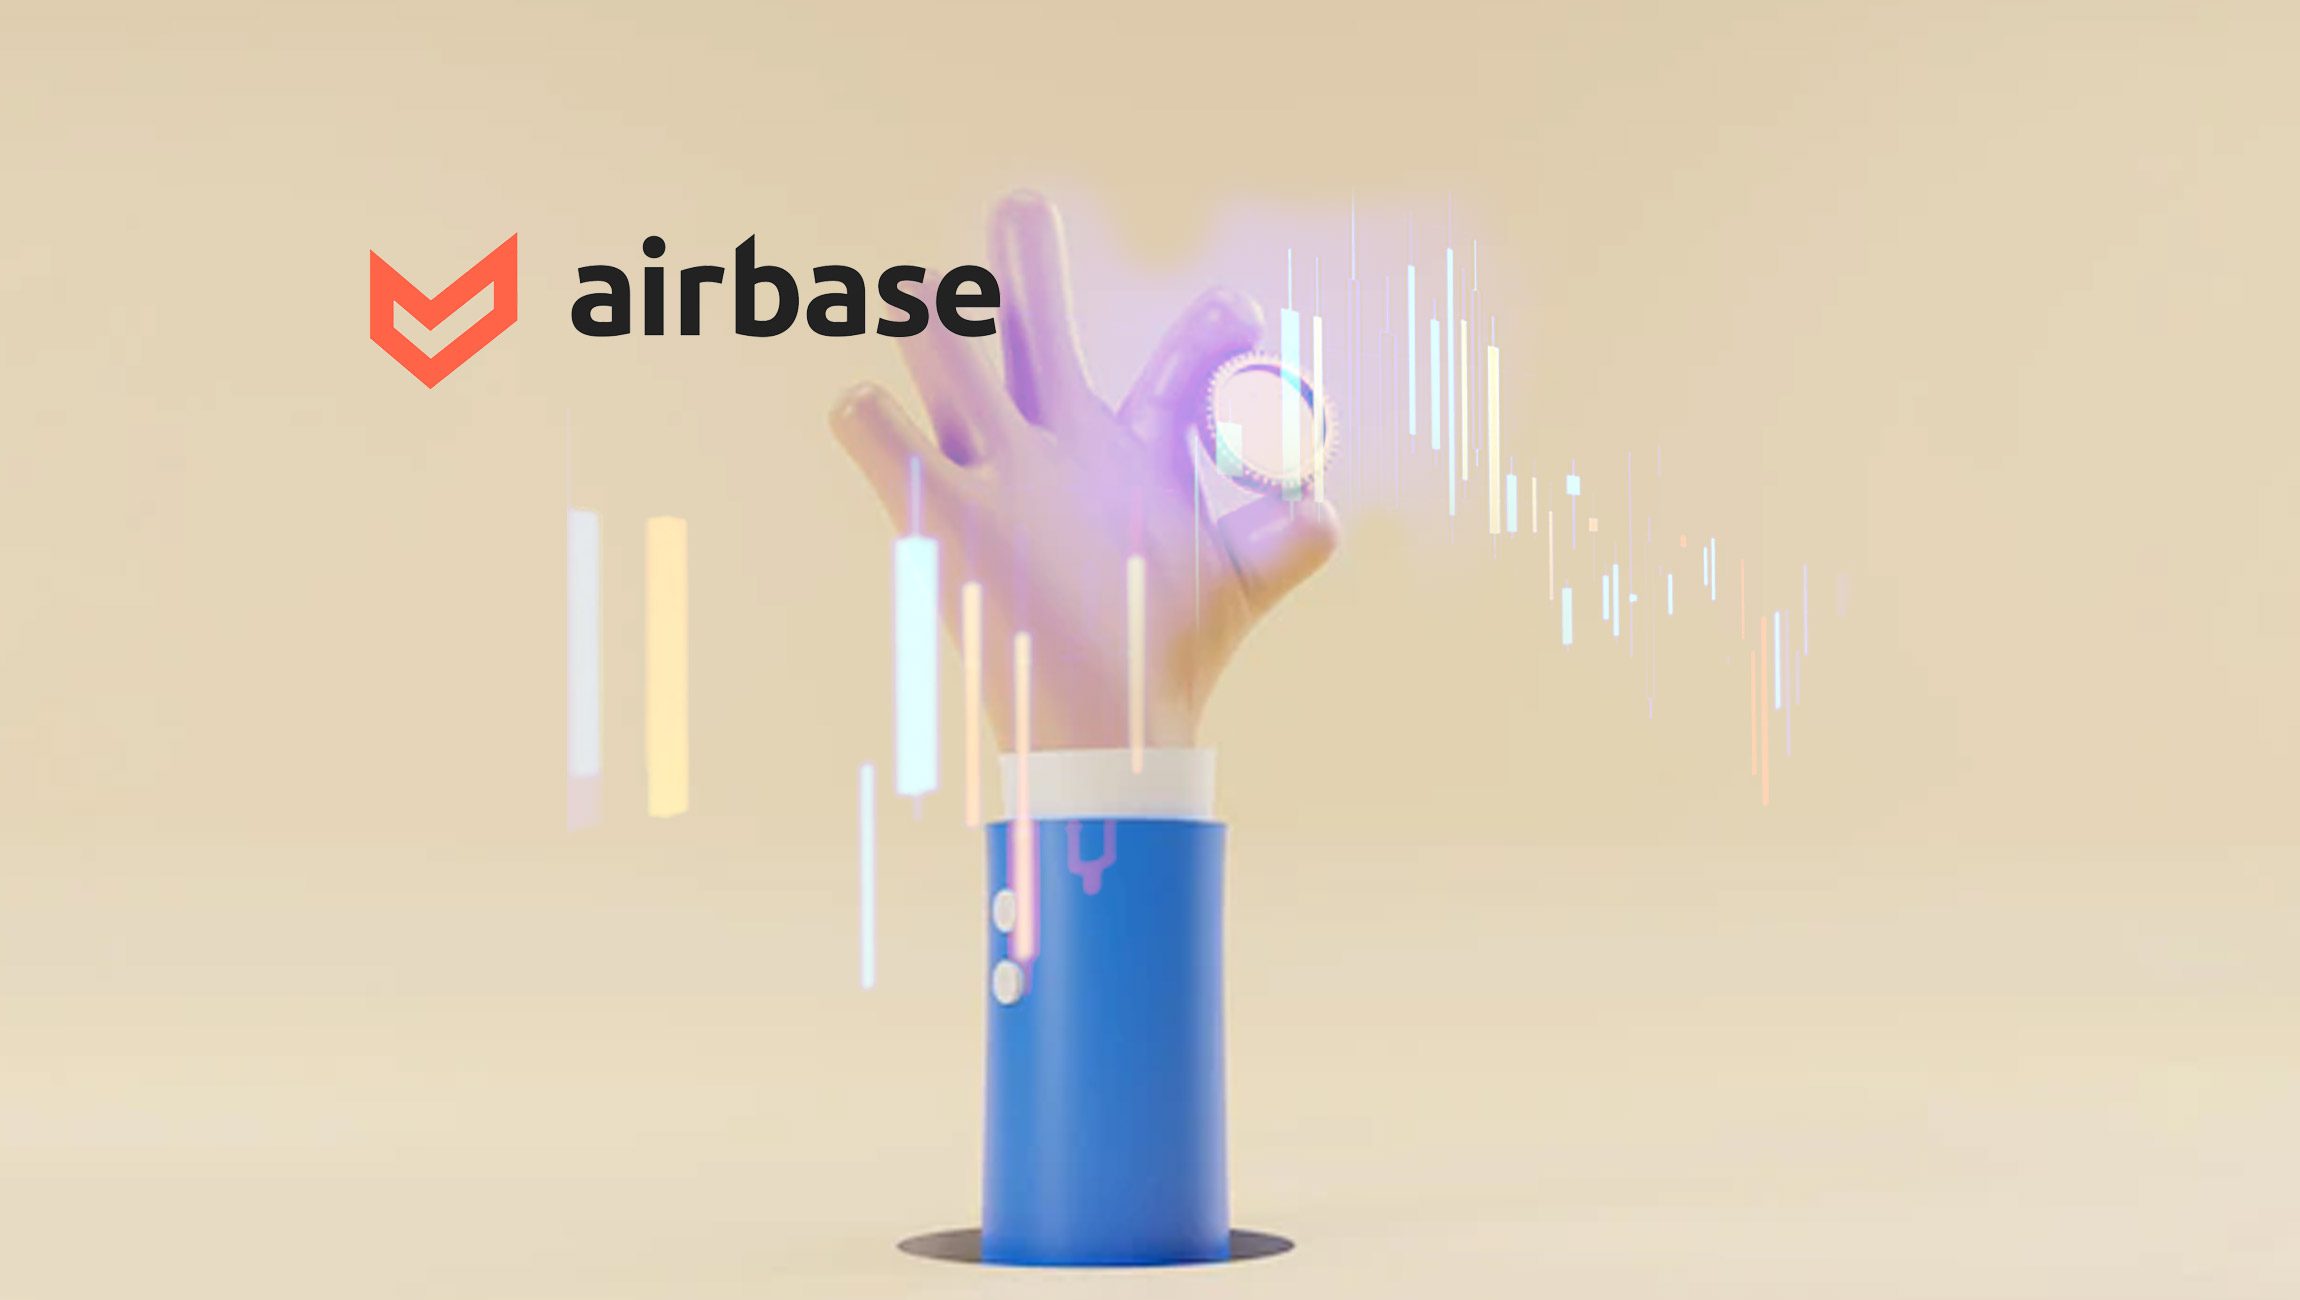 Airbase Secures $150M Credit Facility from Goldman Sachs